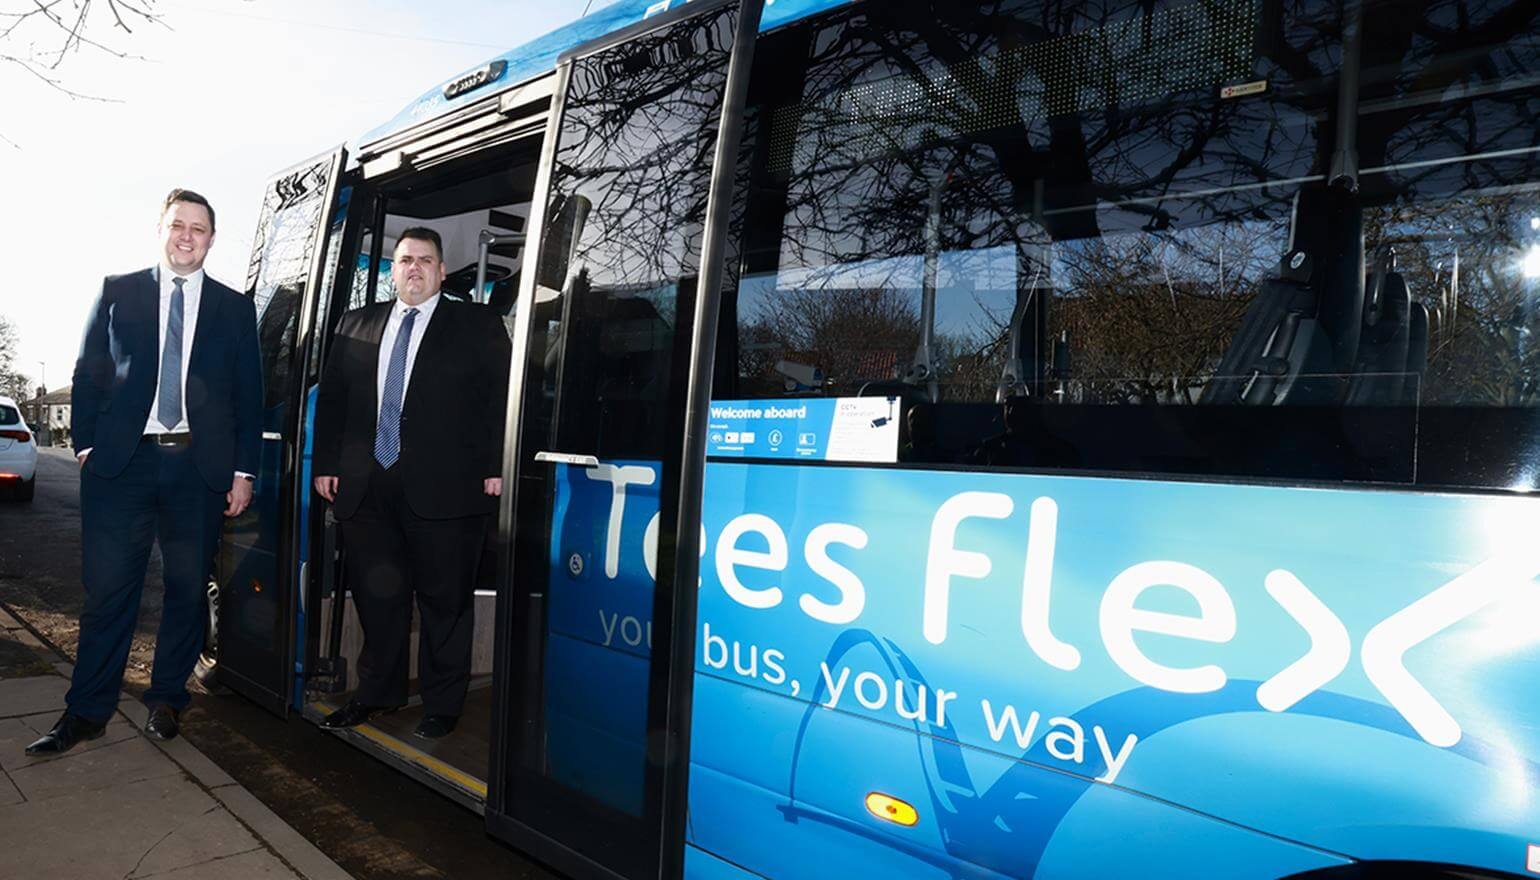 Tees Flex bus service extended for 18 months